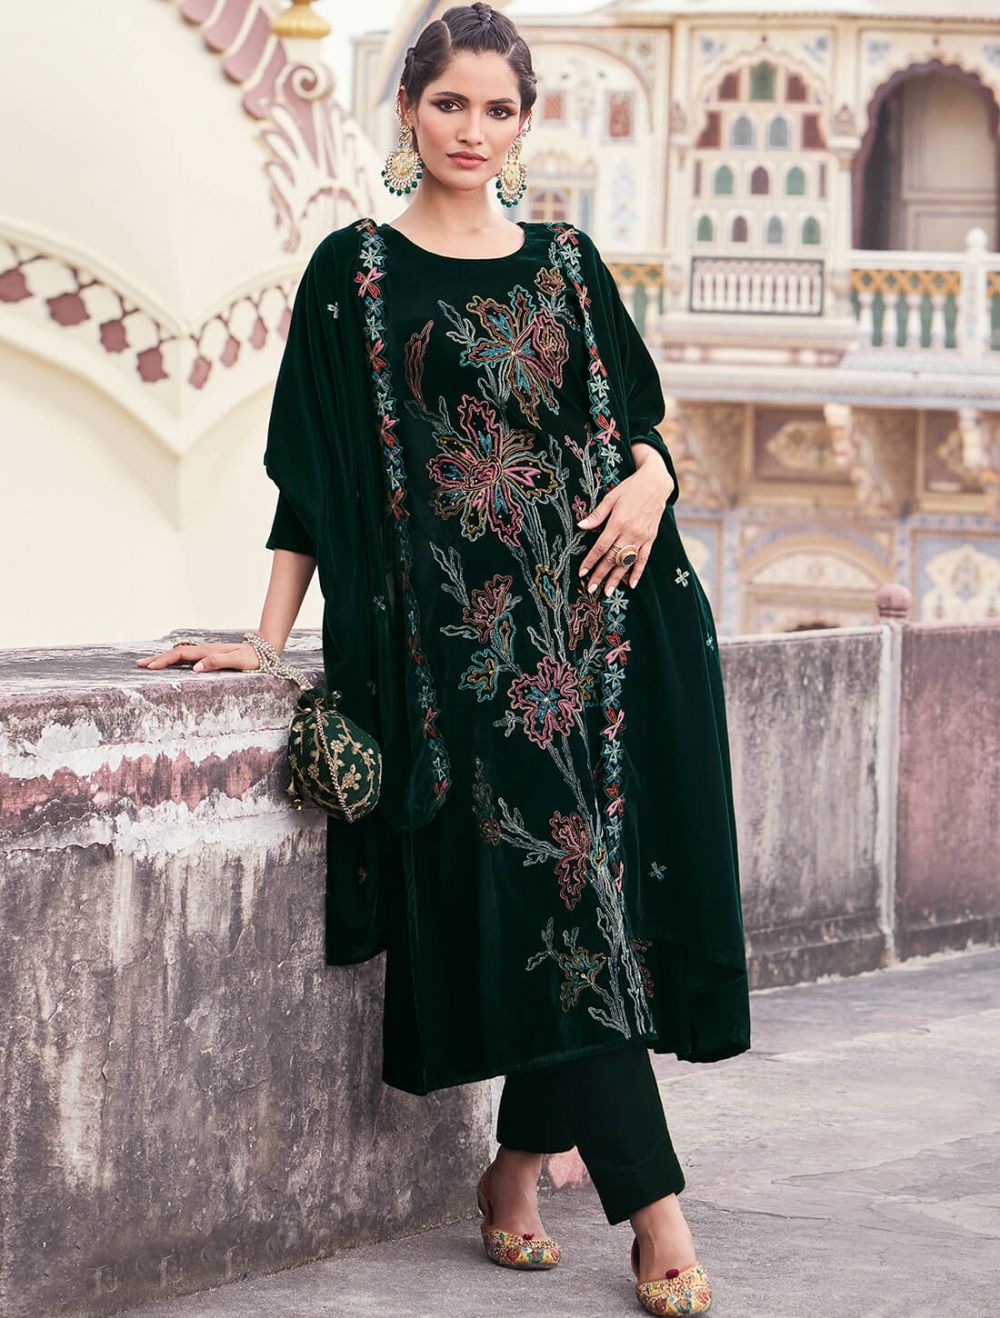 Black Color Velvet Suit With Embroidery Work for Eid Salwar Suit in Black  in USA, UK, Malaysia, South Africa, Dubai, Singapore